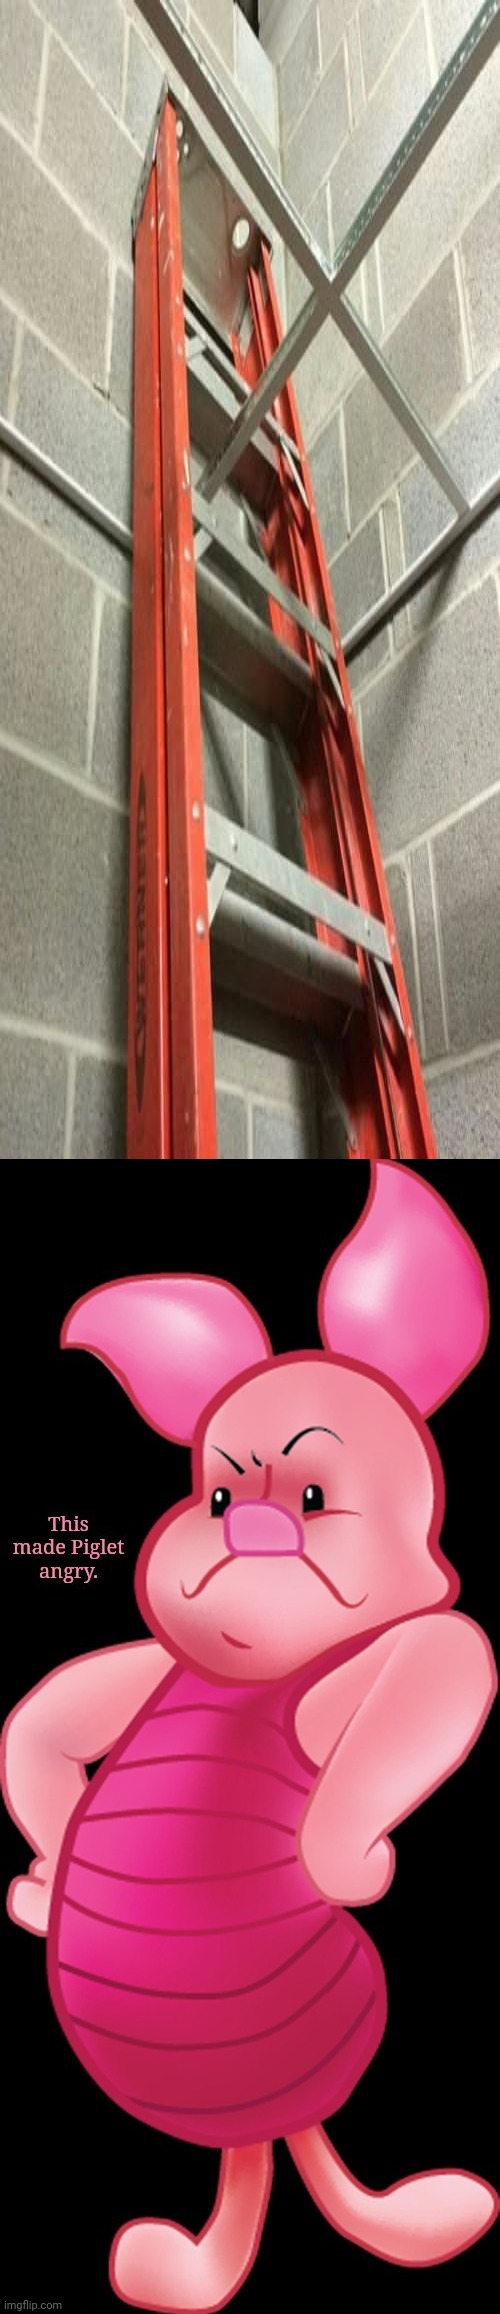 A stuck ladder | image tagged in this made piglet angry,you had one job,memes,fails,ladder,ladders | made w/ Imgflip meme maker